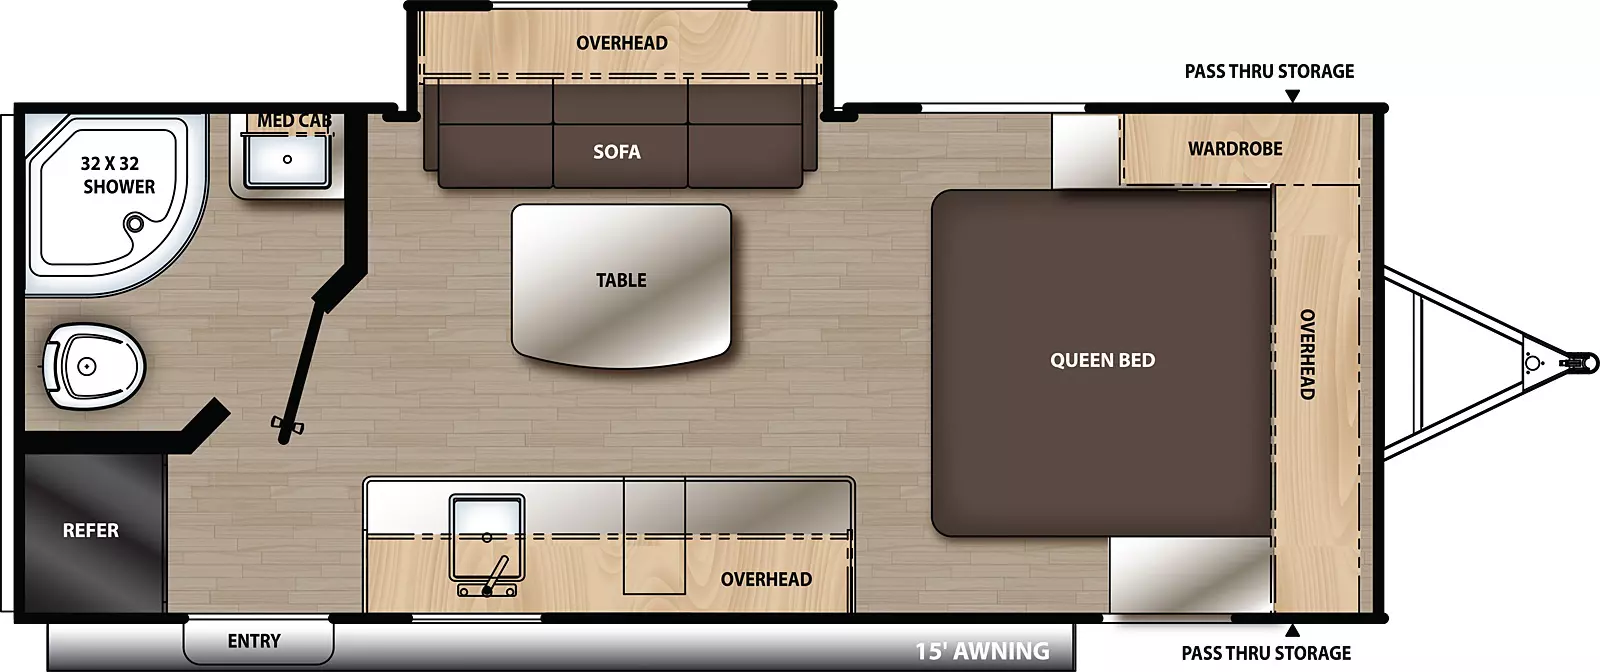 The 18RBS has one slide out on the off-door side and one entry door on the door side. Interior layout from front to back: front facing queen bed with cabinets overhead and wardrobe on off-door side; Kitchen living dining area with slide out on the off-door side containing sofa with cabinets overhead; Freestanding table in the center; door side with overhead cabinets, single bowl sink, and refrigerator located on the door side rear; Rear off-door side corner bathroom. 